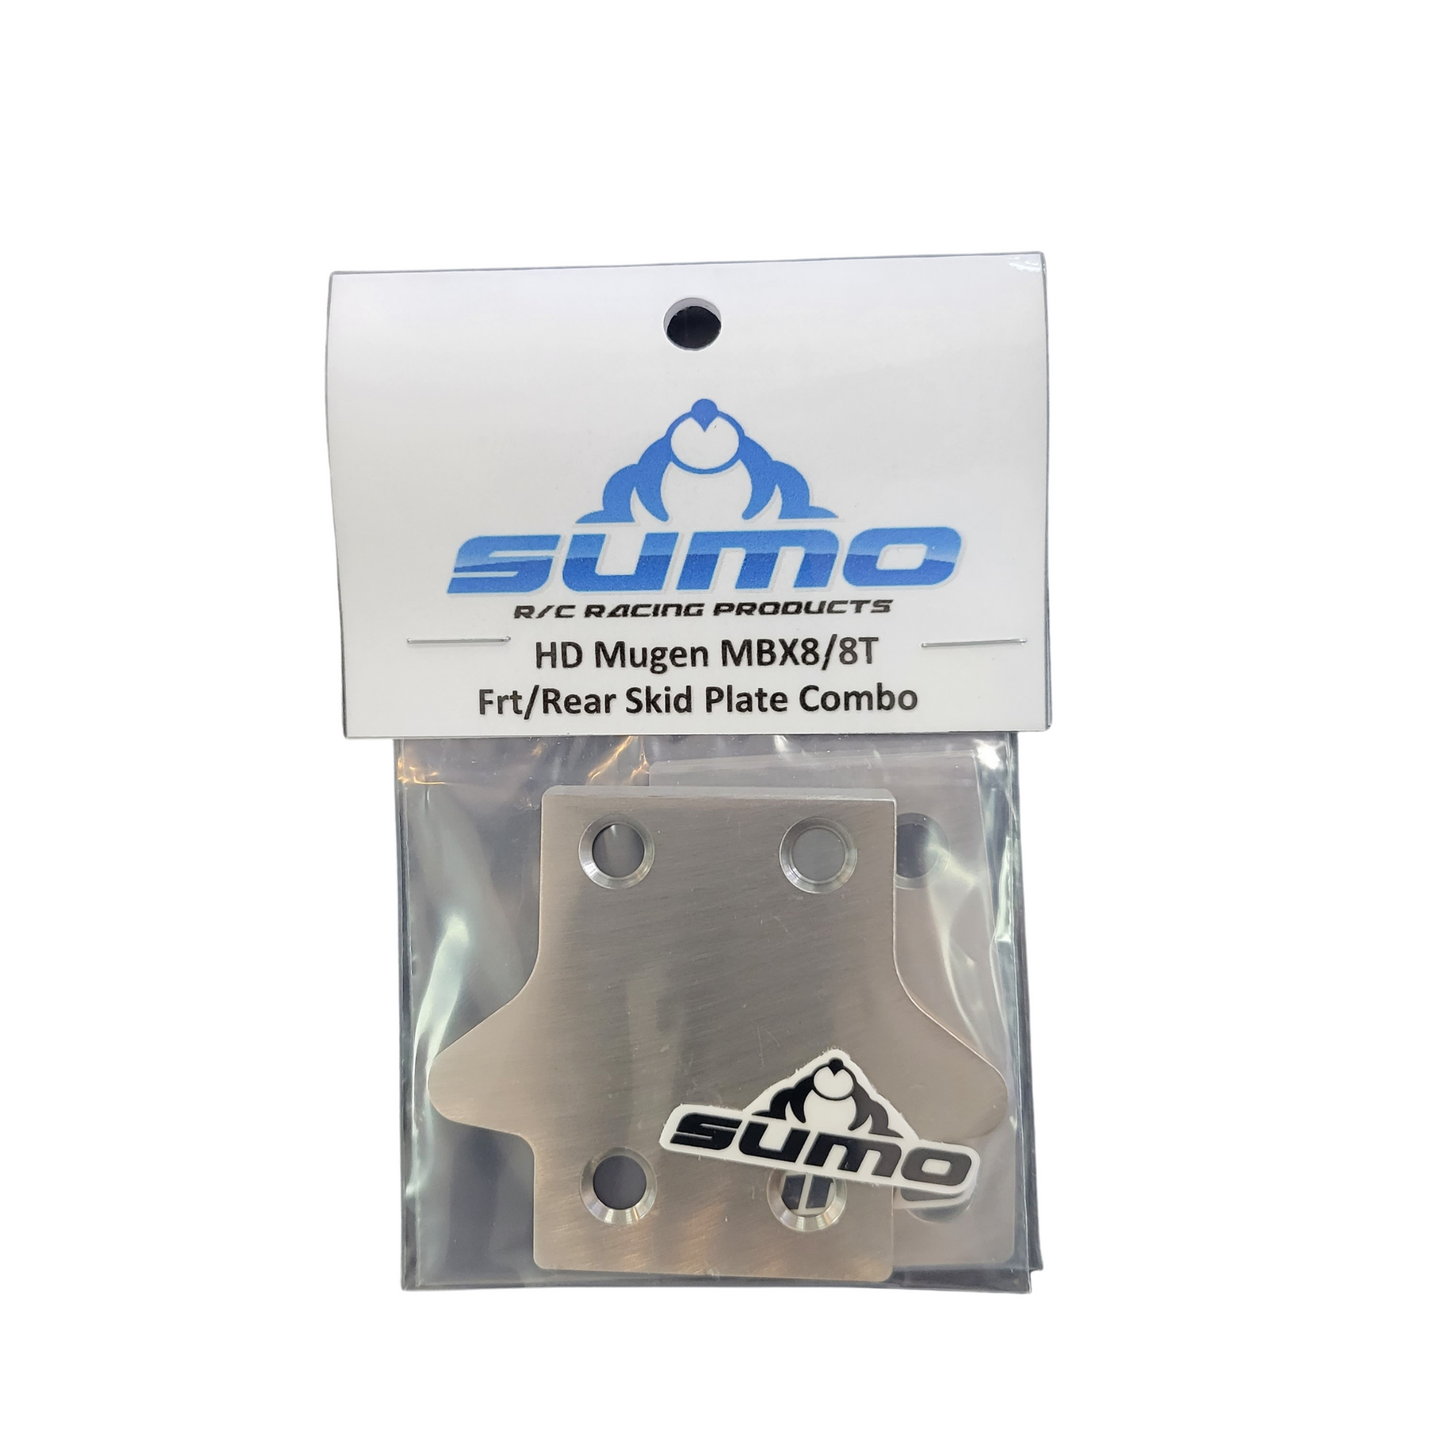 Sumo Racing Skid Plates for Mugen MBX-8 / MBX-8T All Models